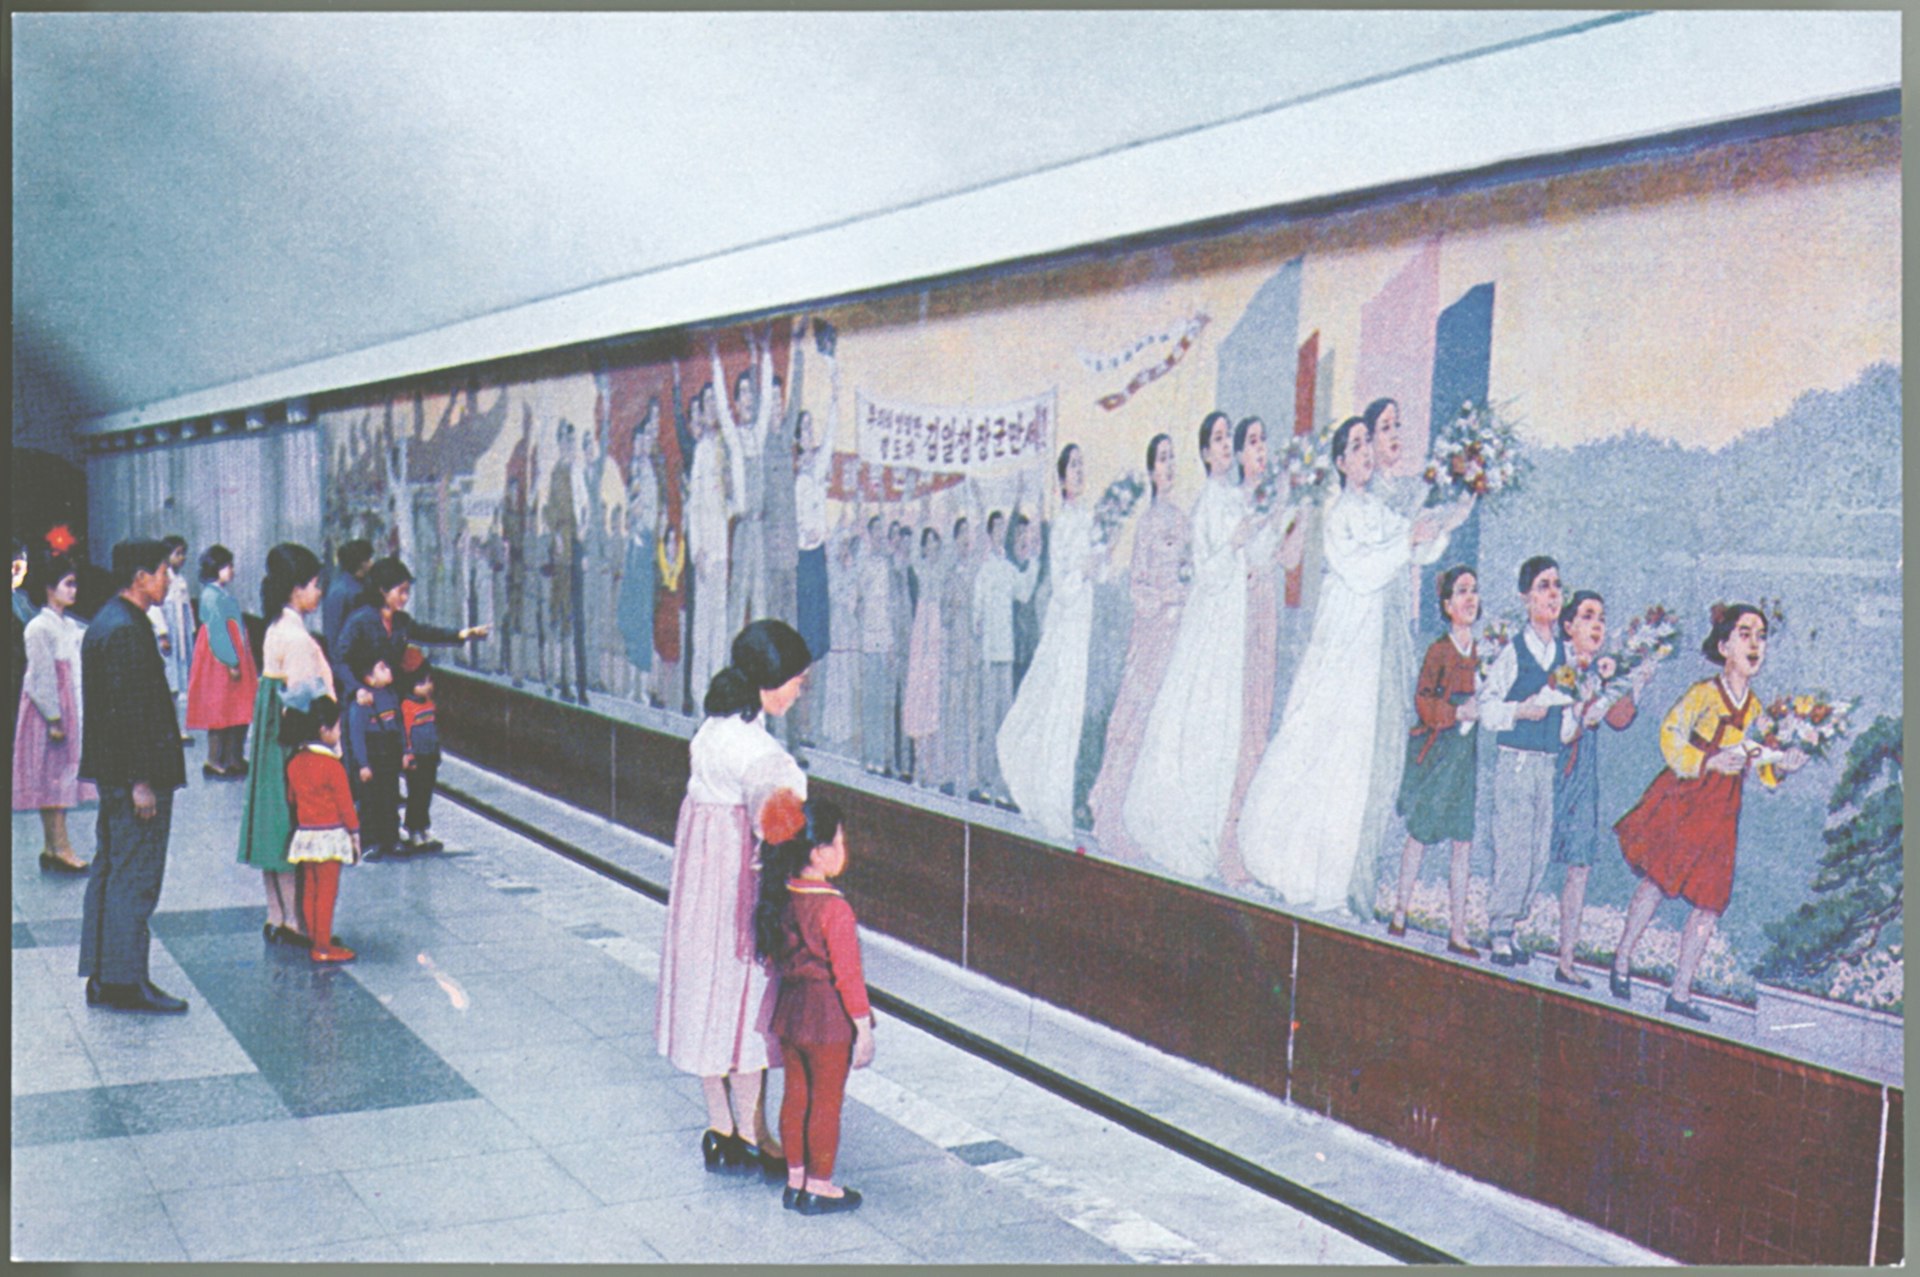 Card from a souvenir set of Pyongyang Metro postcards. In the 1990s and early 2000s there were rumours in the Western press that graffiti was being etched on to the windows of the Pyongyang Metro carriages. In fact, the carriages had been imported second-hand from West Berlin and the graffiti (impossible to remove from glass) was therefore in German.